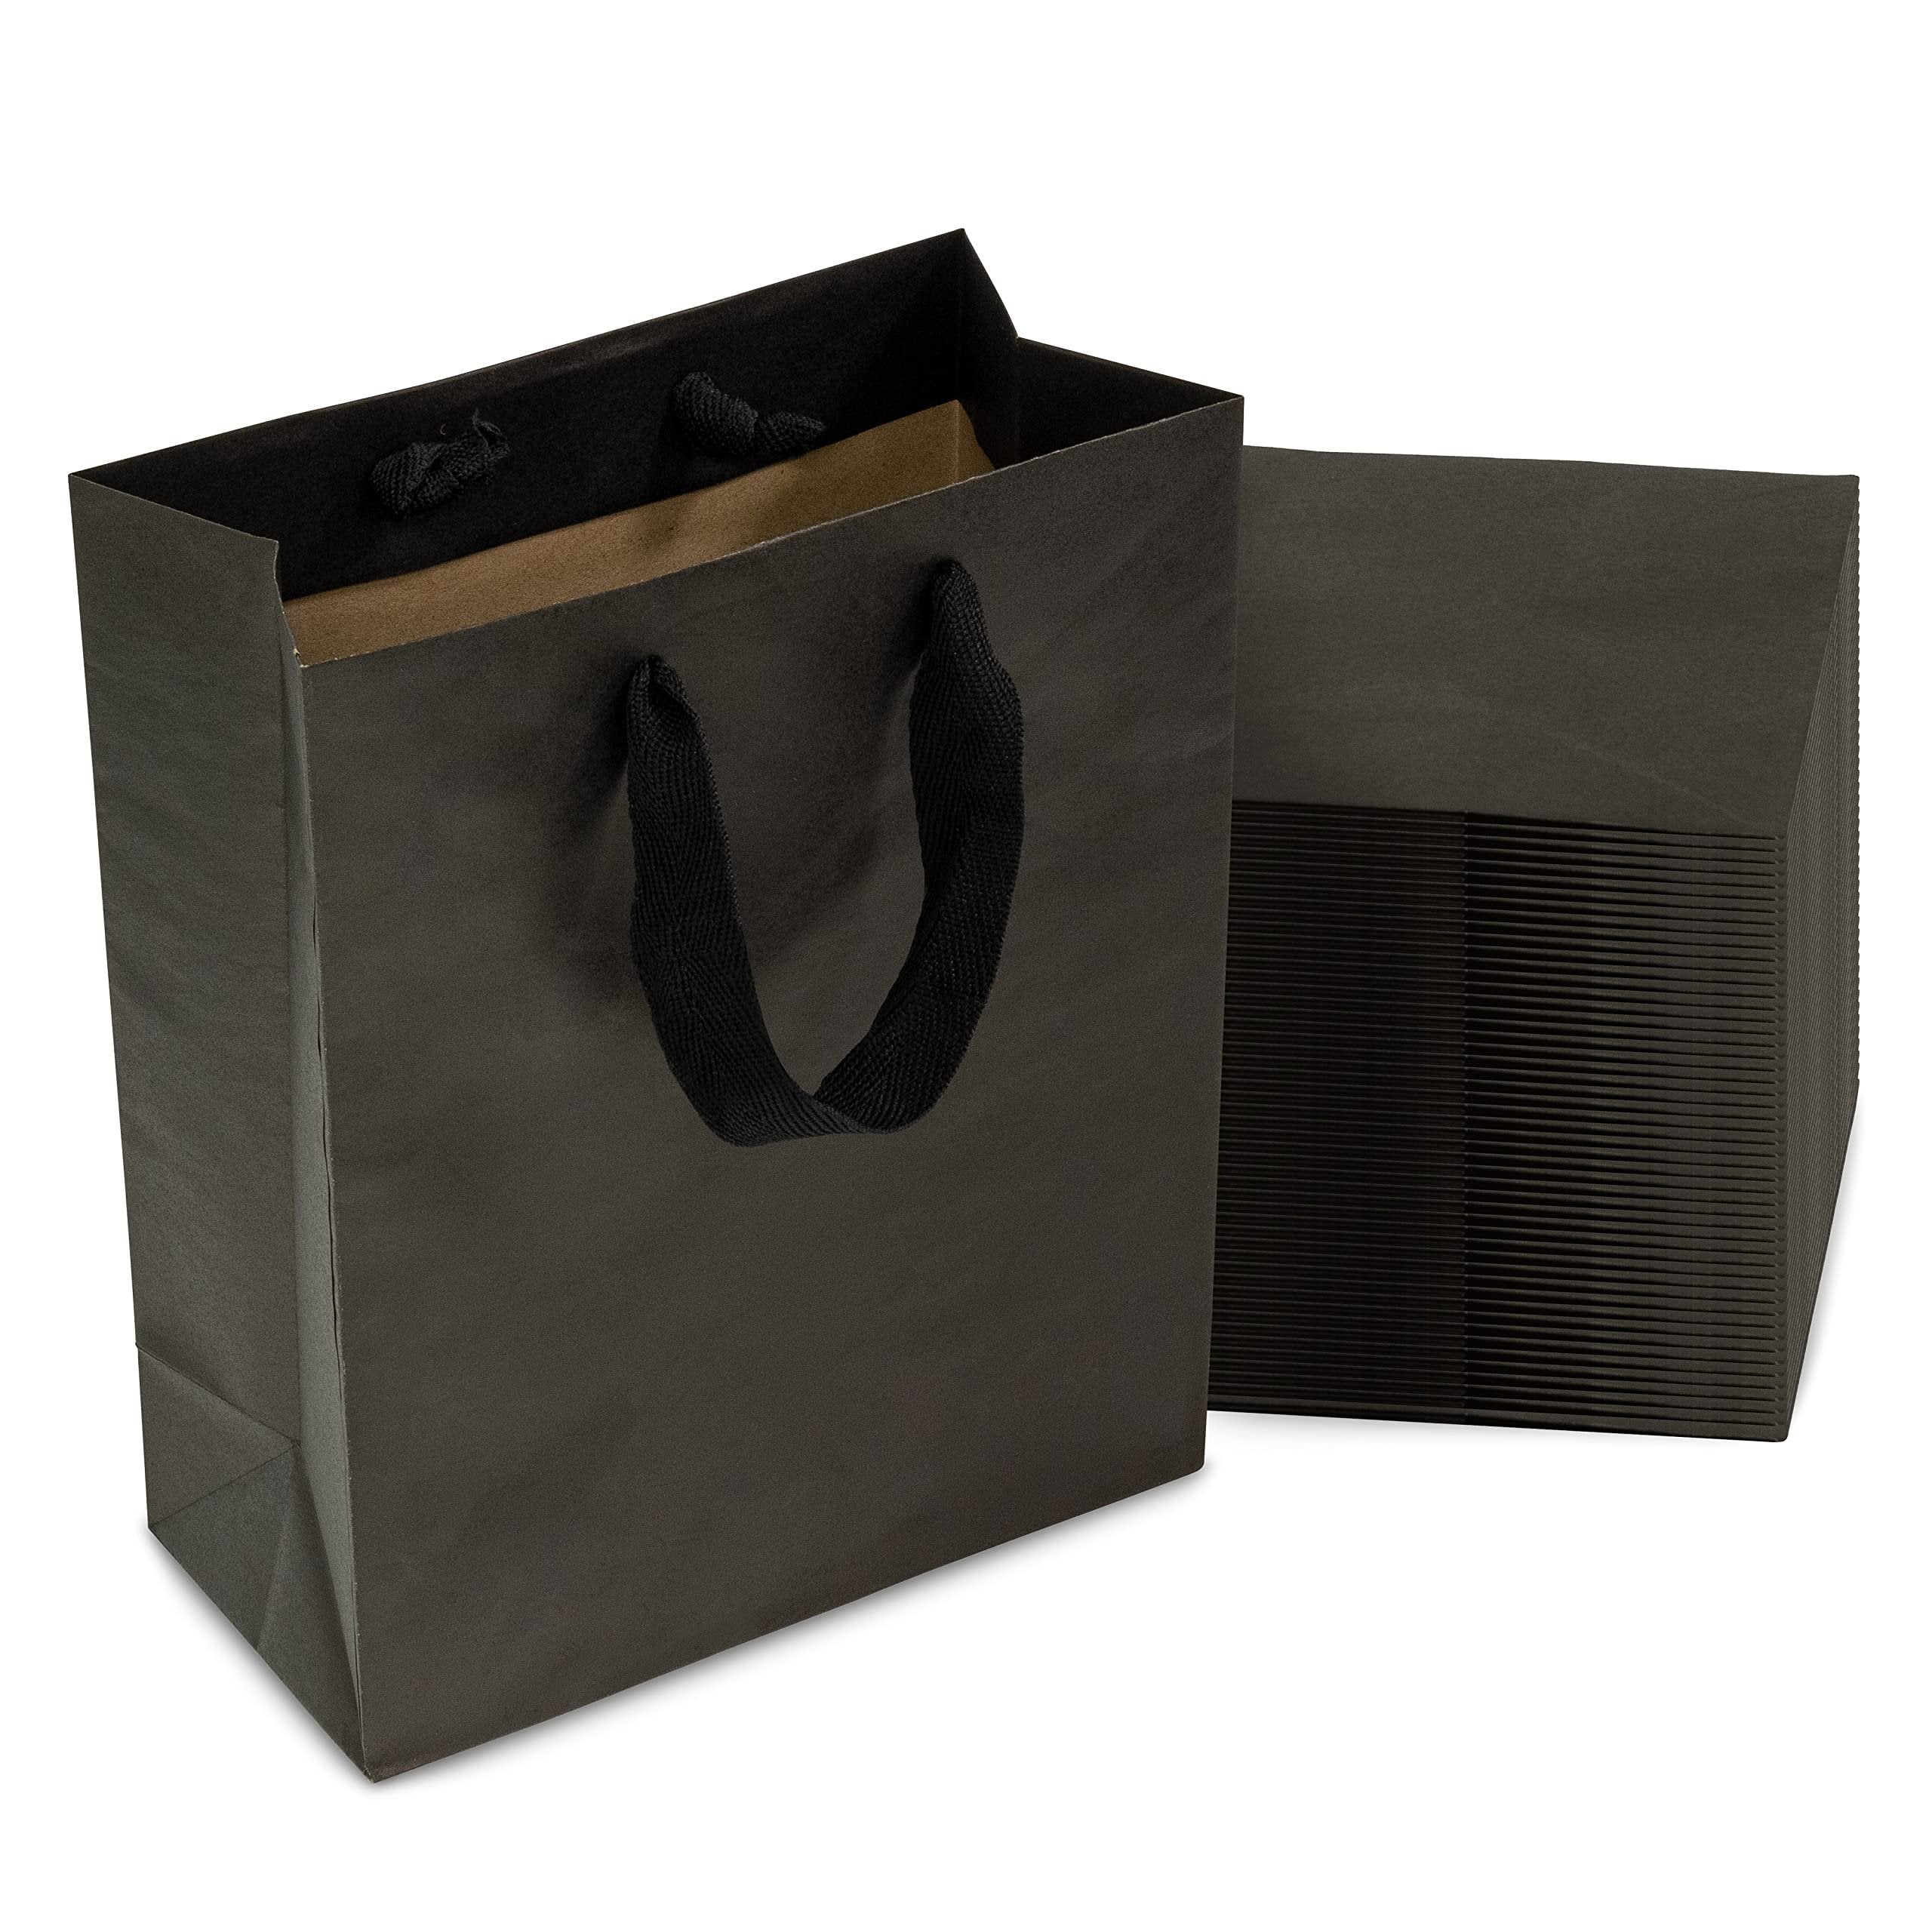 Black Gift Bags with Handles - 8x4x10 Inch 50 Pack Designer Shopping Bags in Bulk, Small Gift Wrap Totes with Fabric Ribbon Handles for Boutiques, Small Business, Retail Stores, Merchandise, Parties